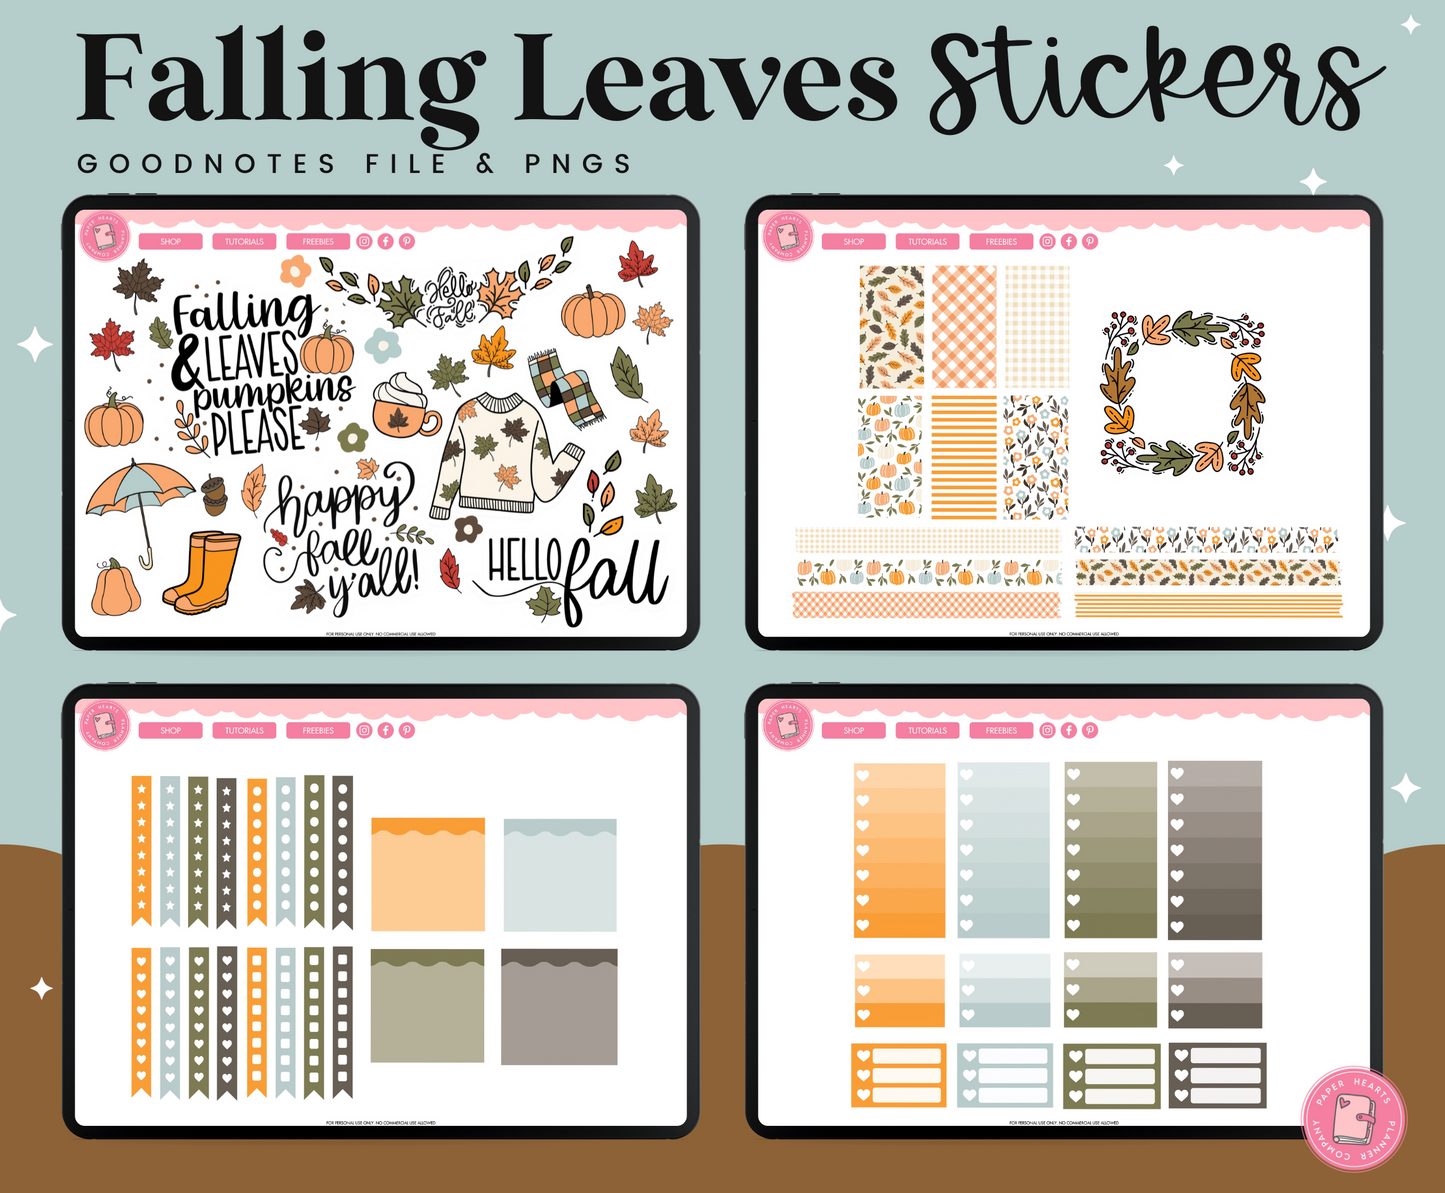 Falling Leaves Stickers